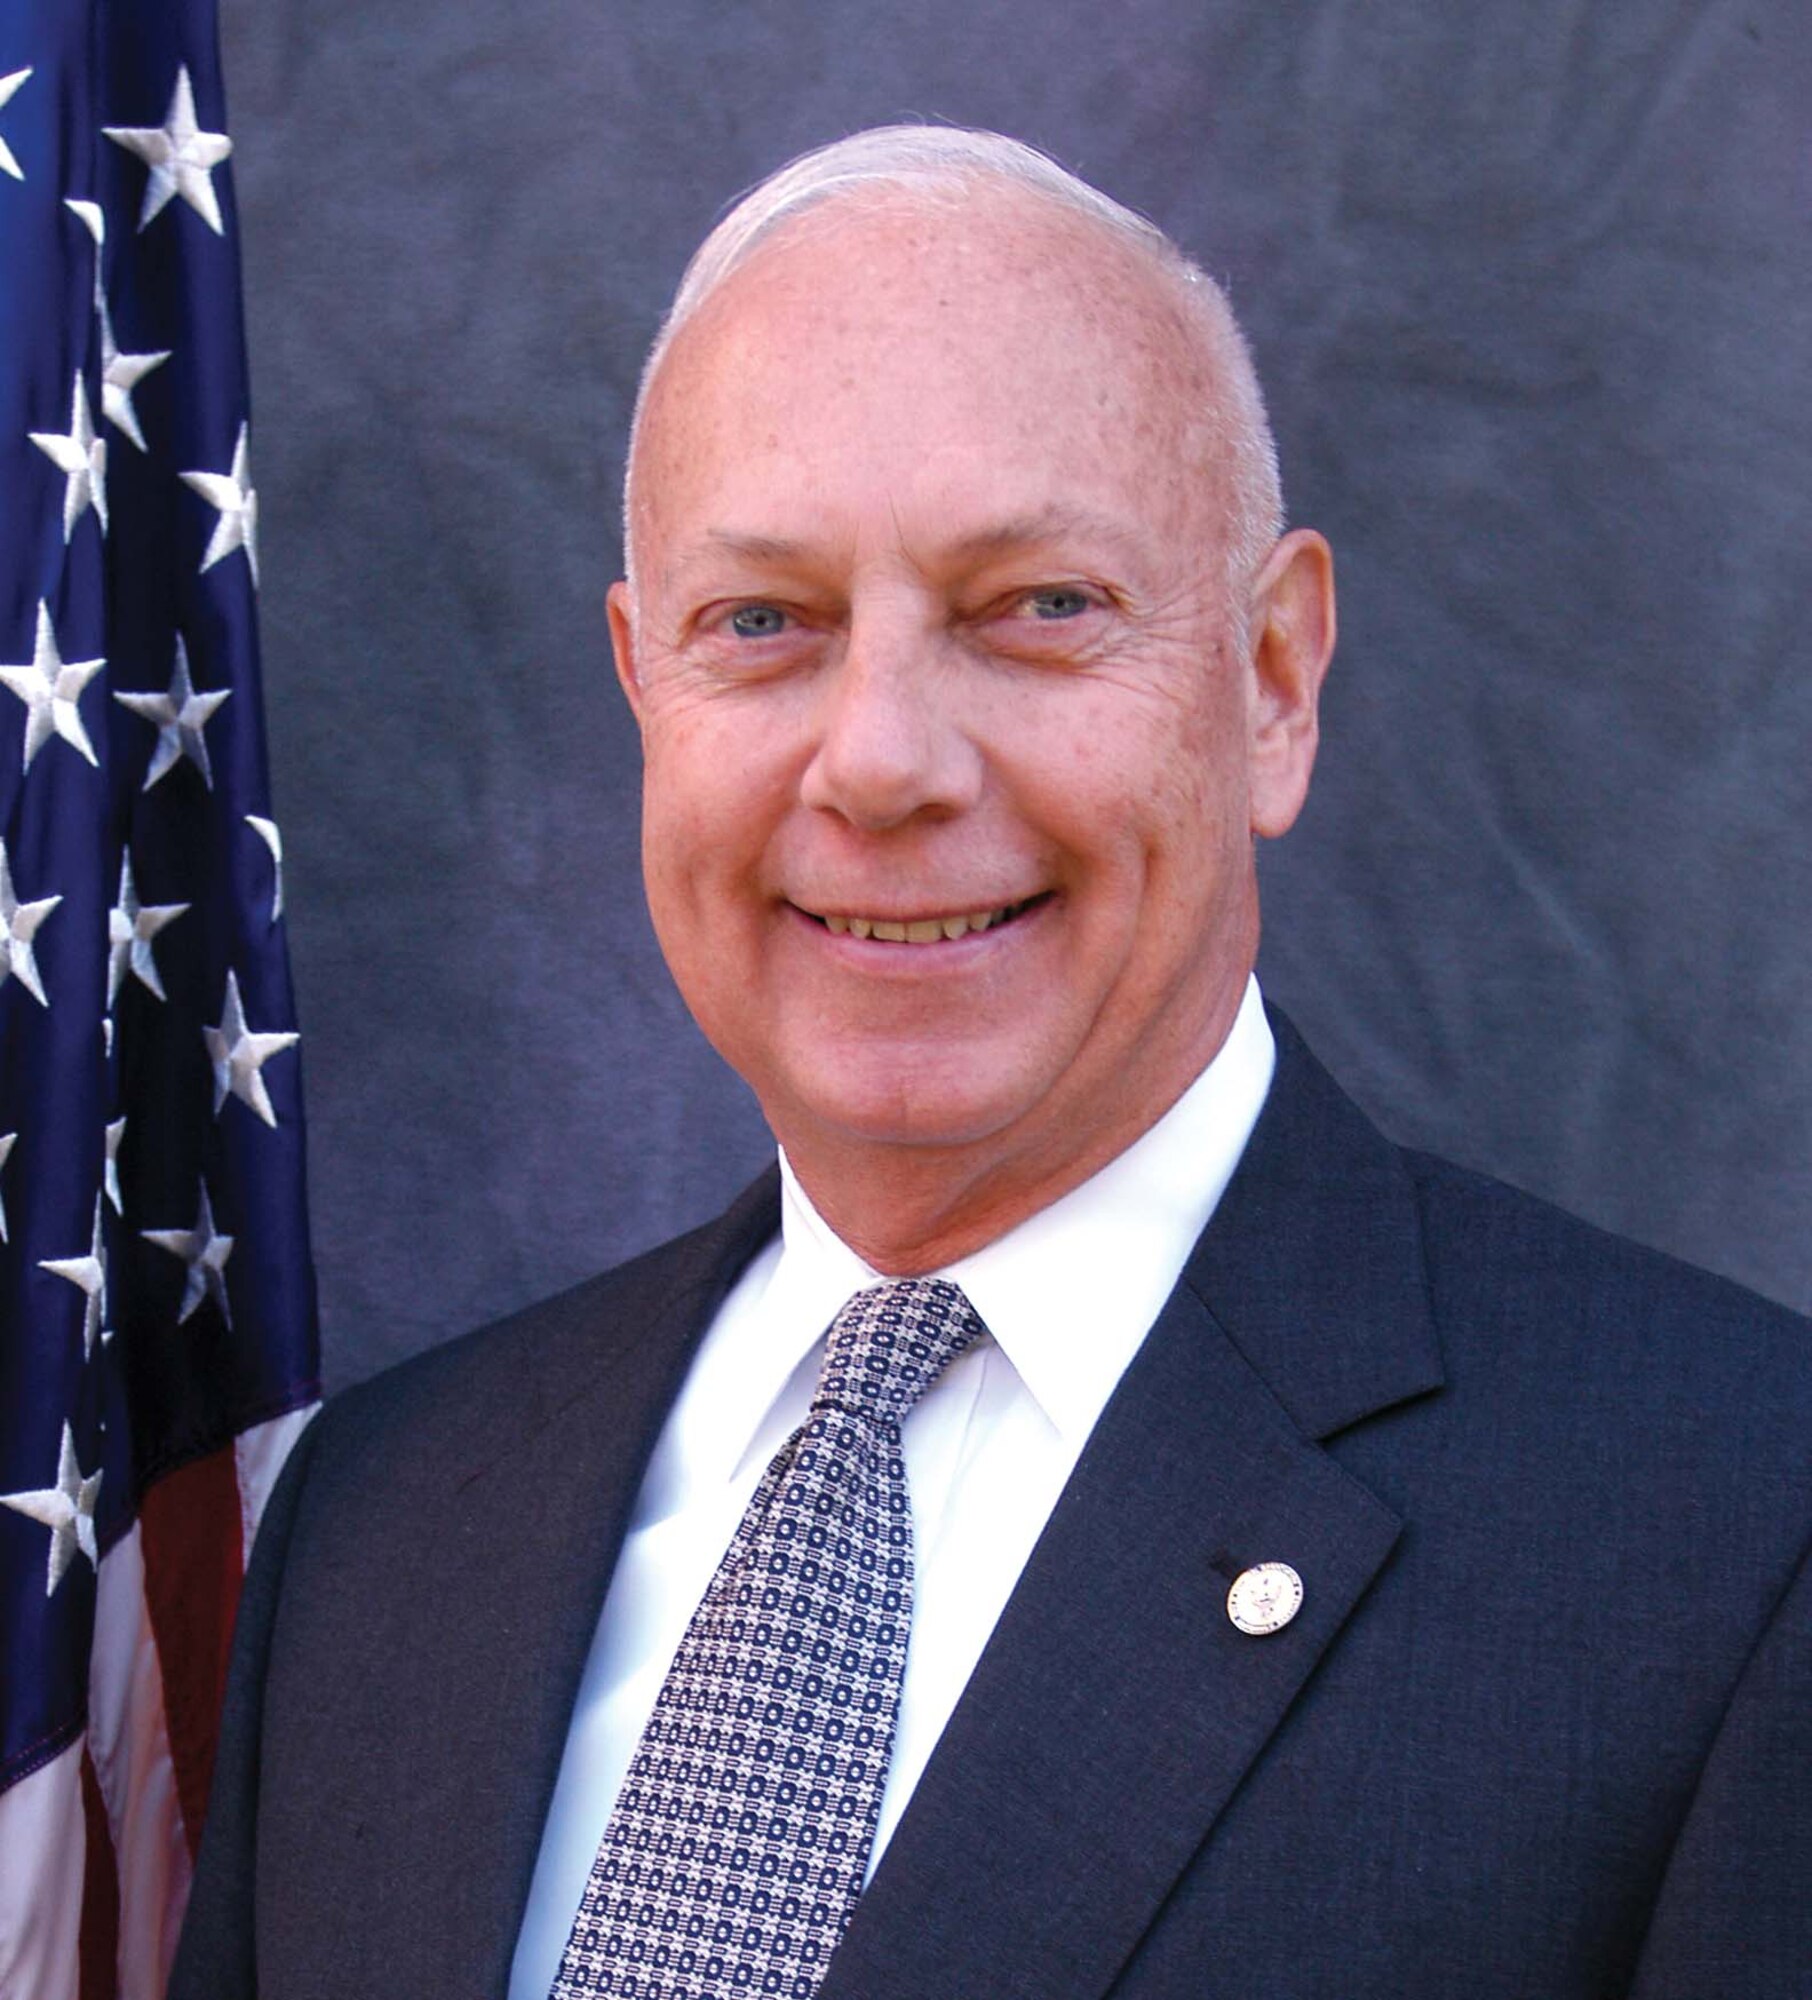 Retired Army Maj. Gen. William M. Matz, Jr., National Association for the Uniformed Services president, will speak to Retiree Appreciation Day attendees at Wright-Patterson Air Force Base Oct. 25. (NAUS photo)